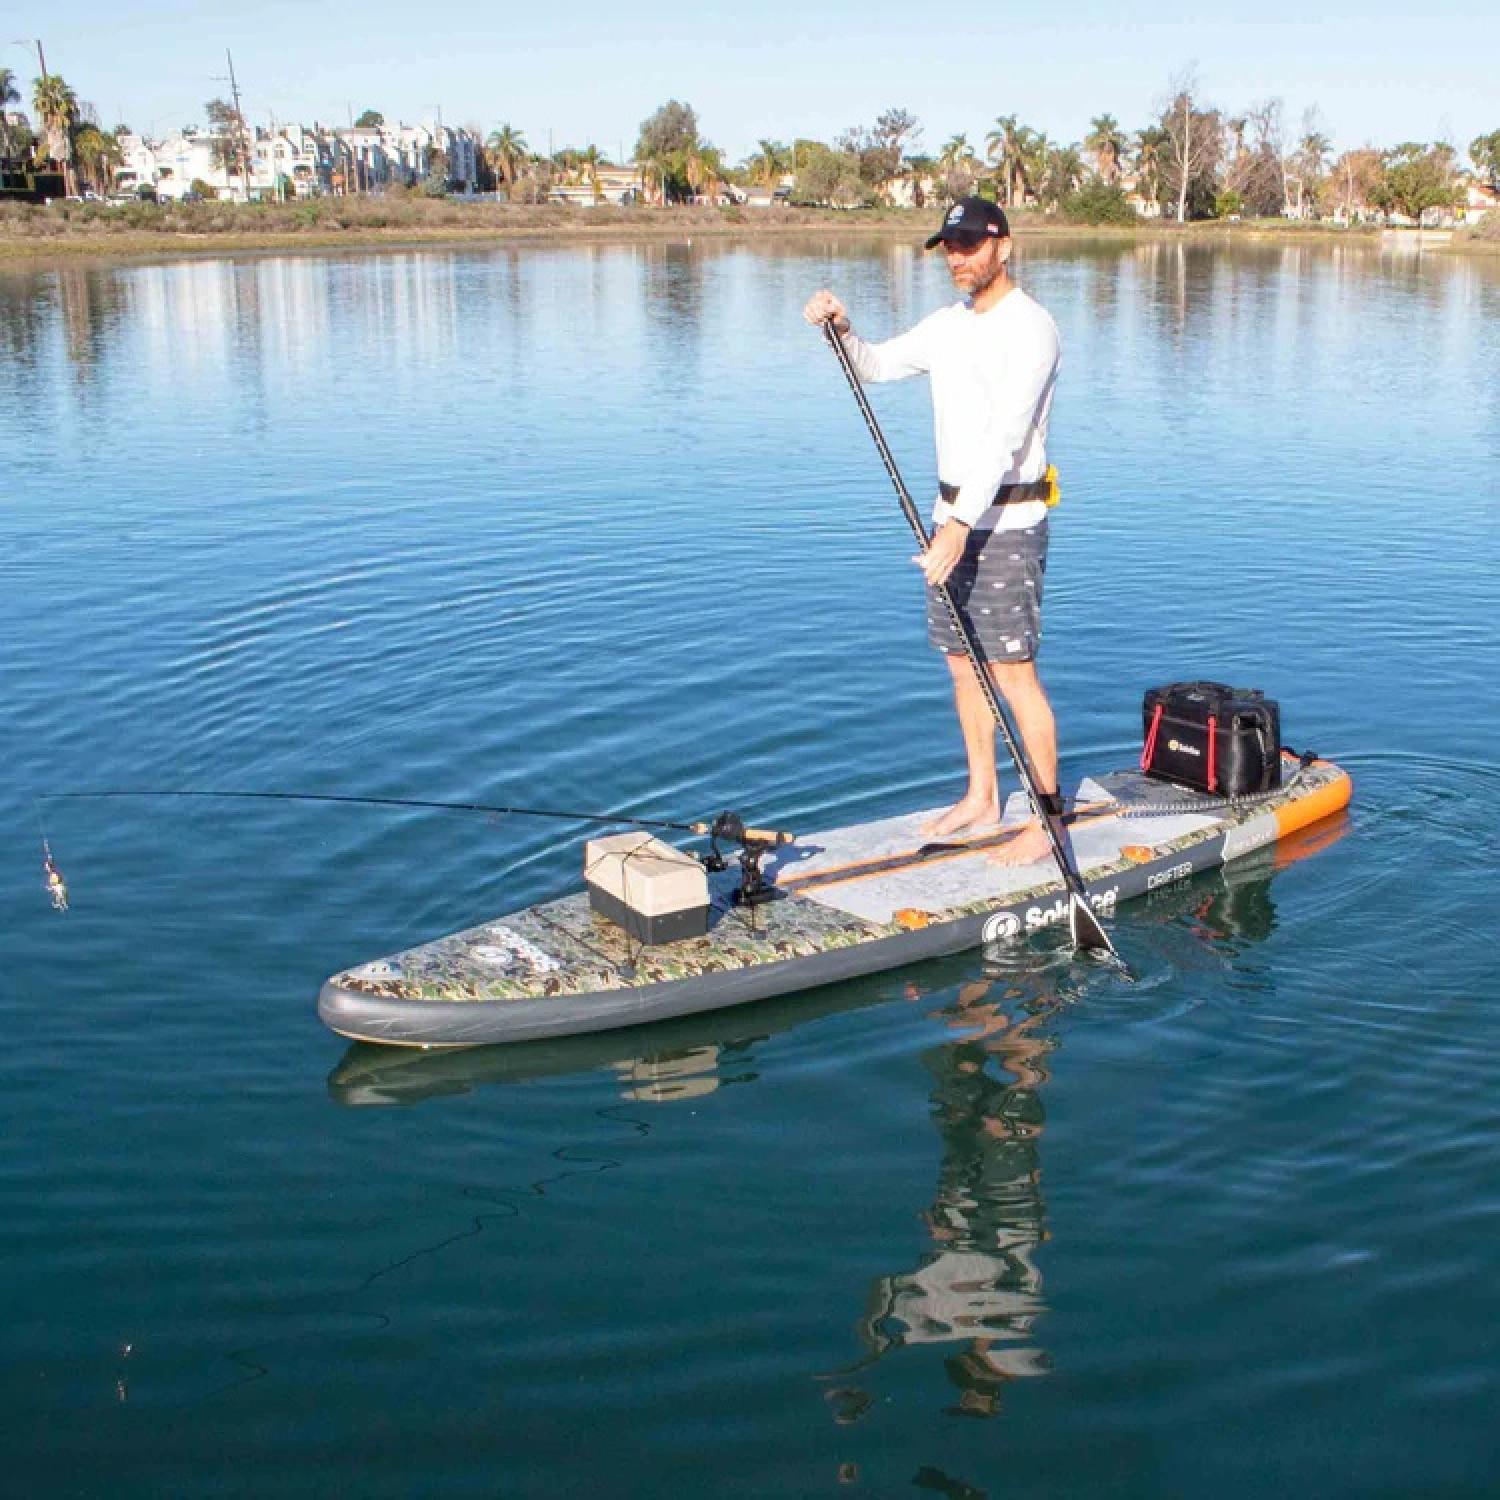 Solstice Drifter Inflatable SUP Kit